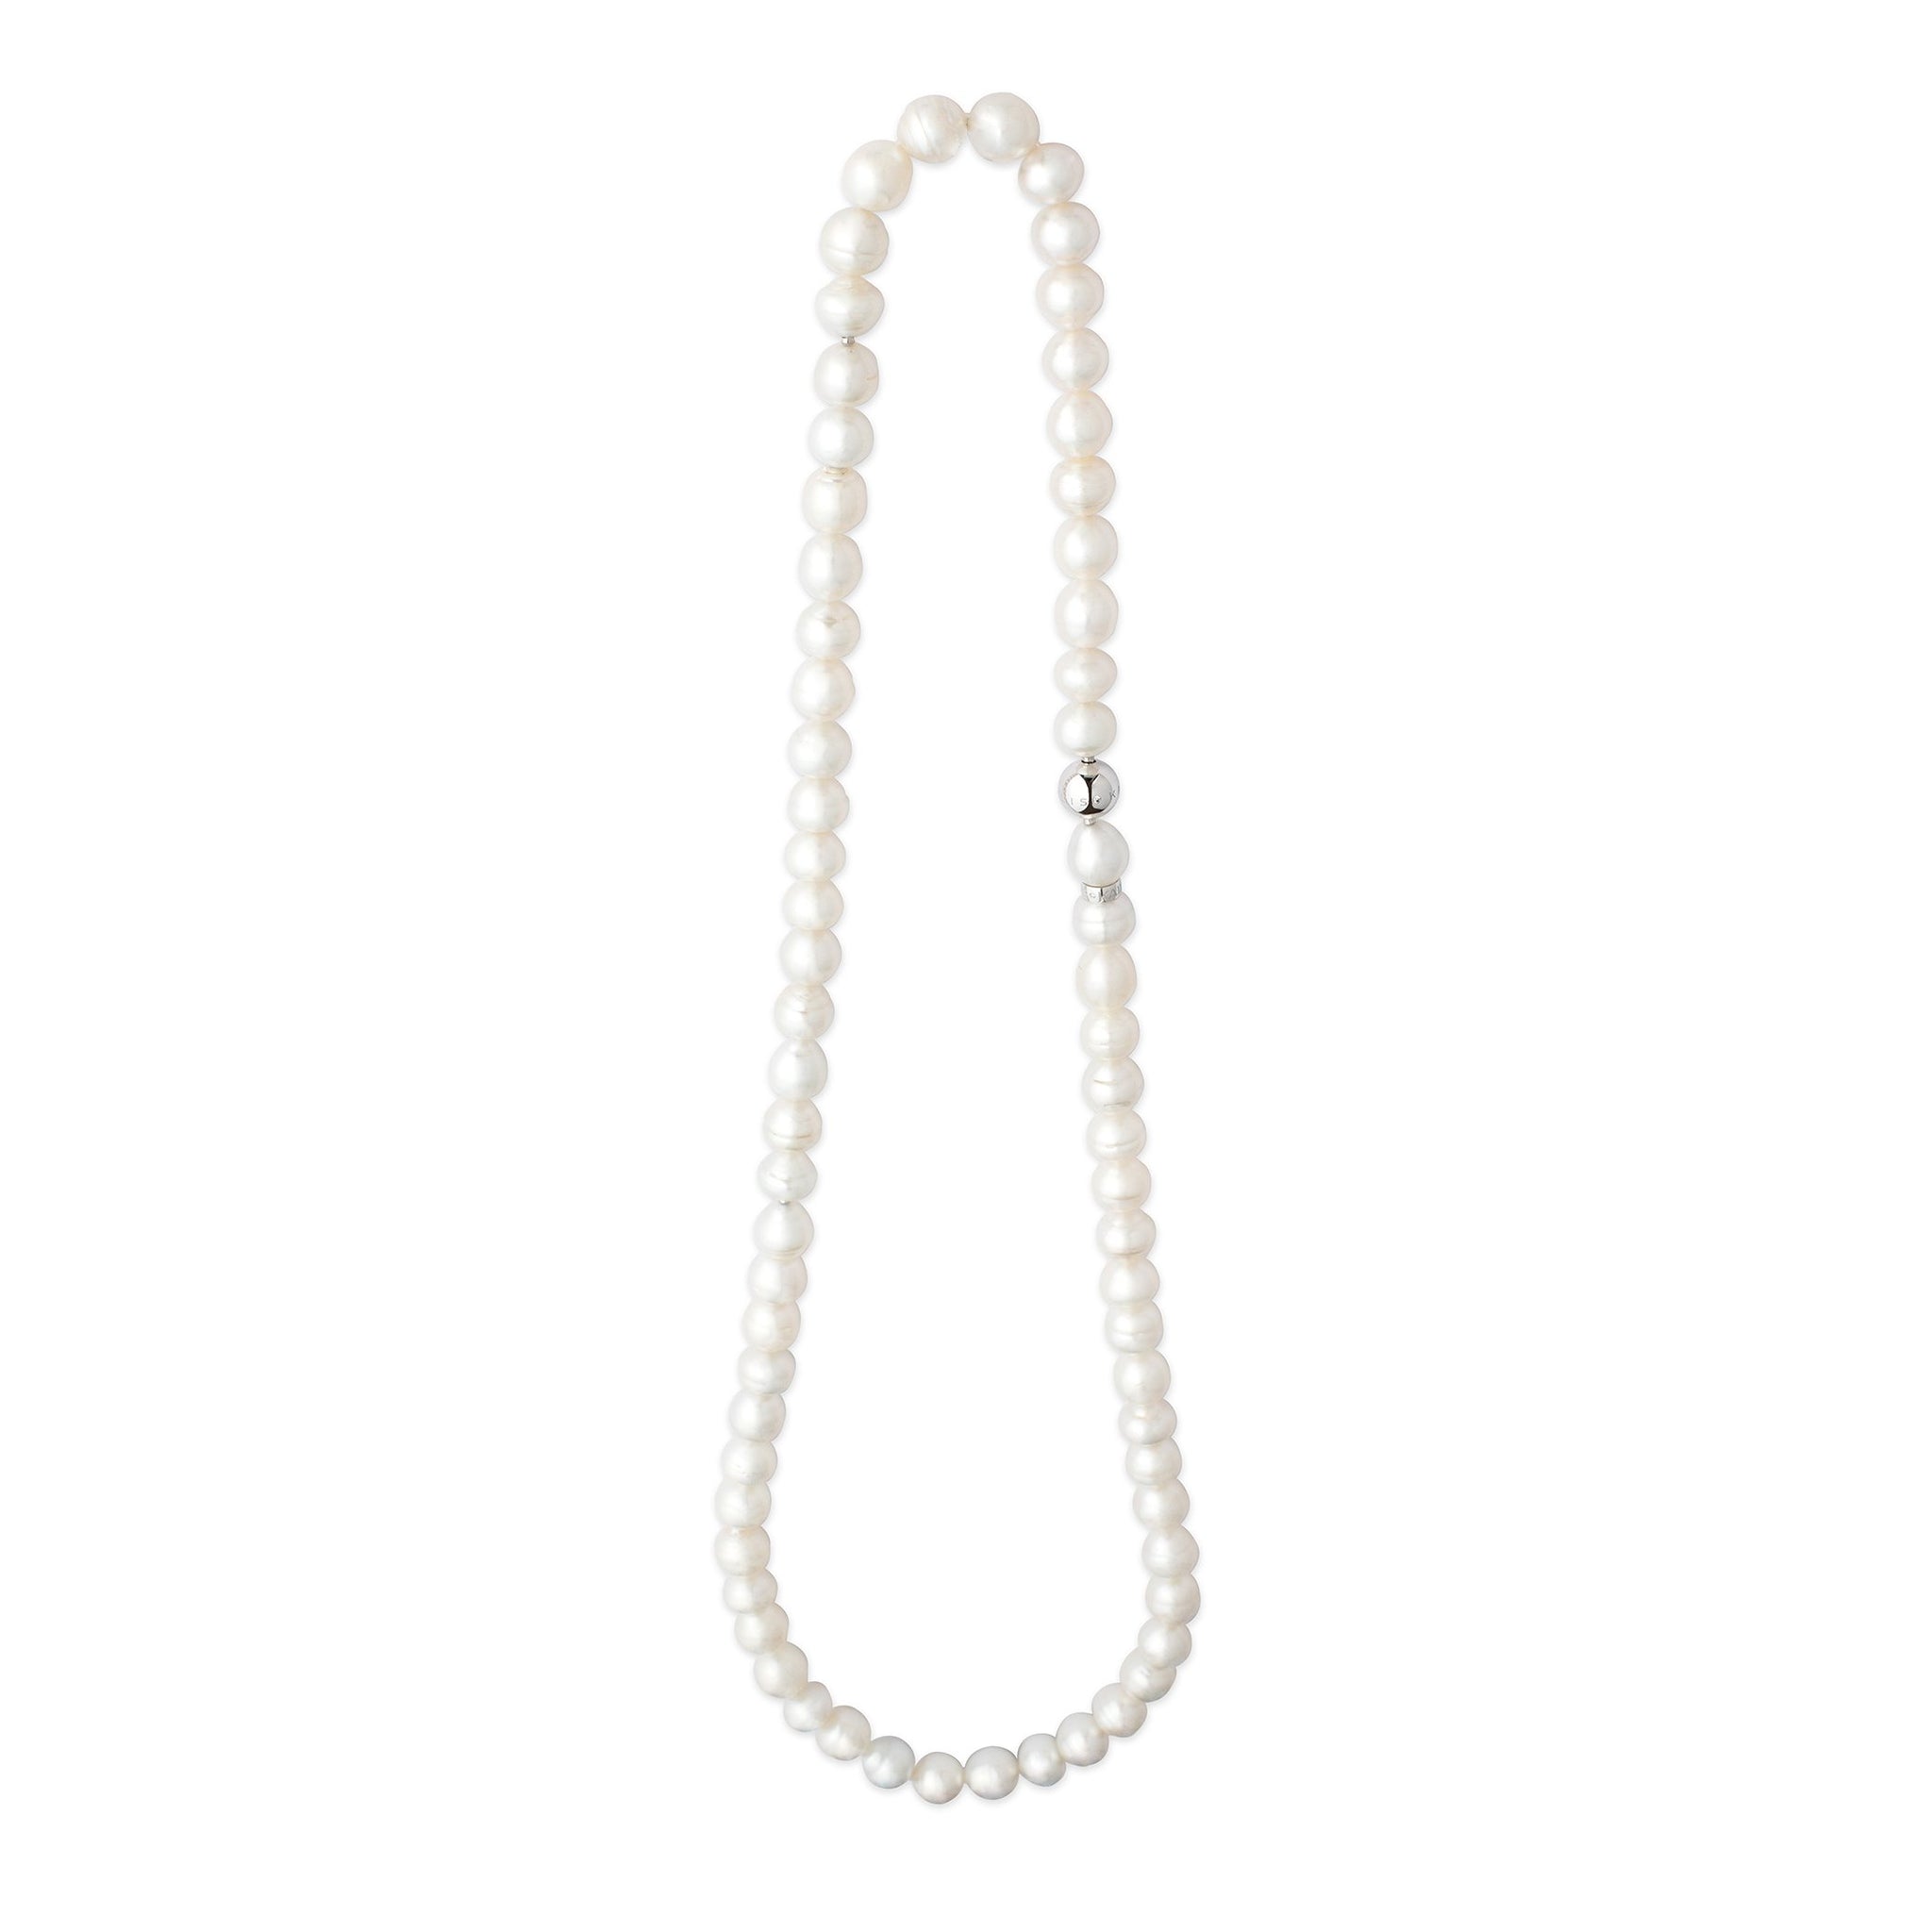 Kailis Jewellery - Pearl Strand - White Gold Clasp